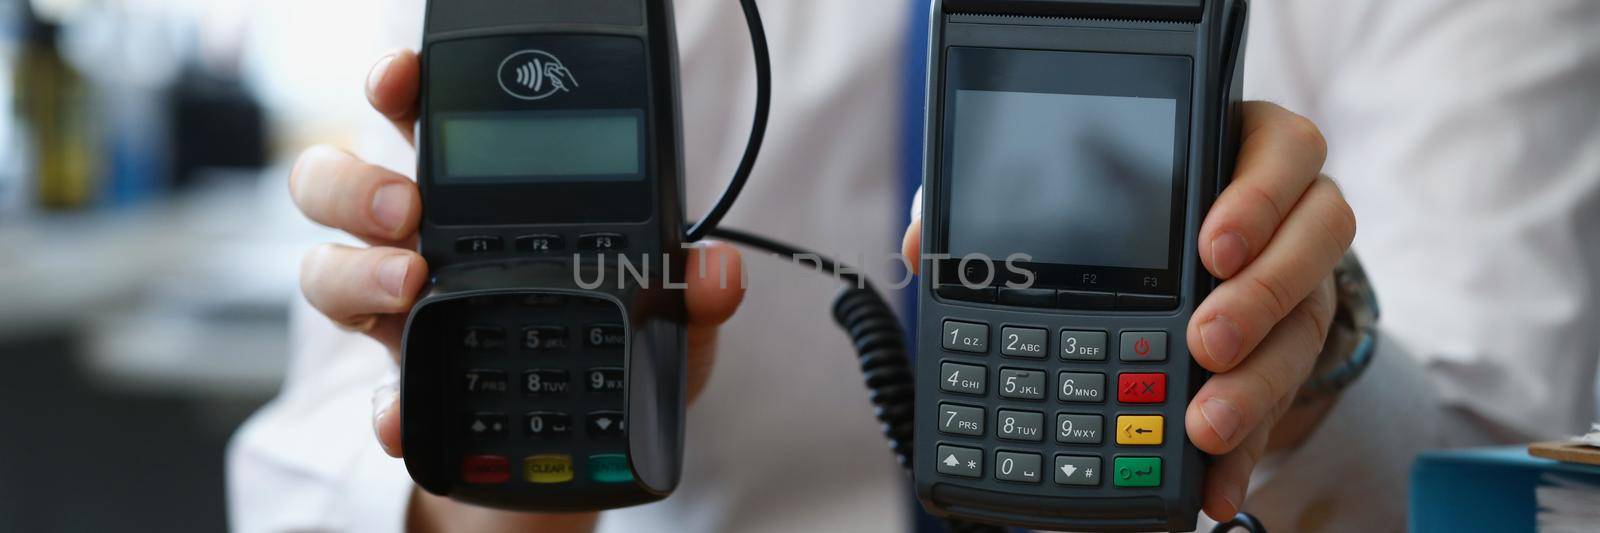 Man hold different models of credit card reader machines for cashless pay by kuprevich